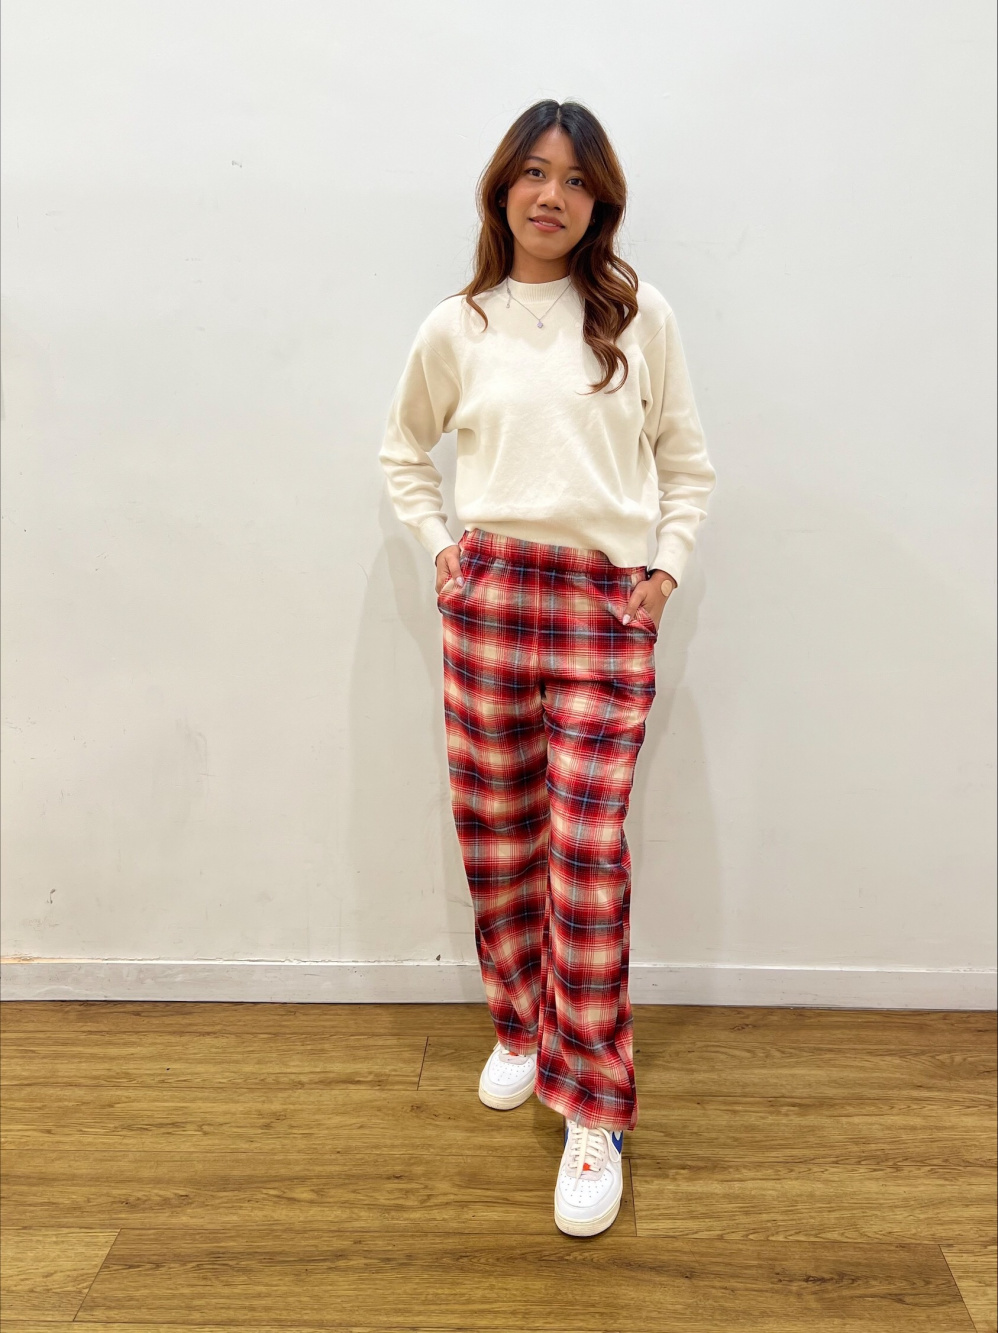 Red Plaid Pajama Pants Outfits For Women (2 ideas & outfits